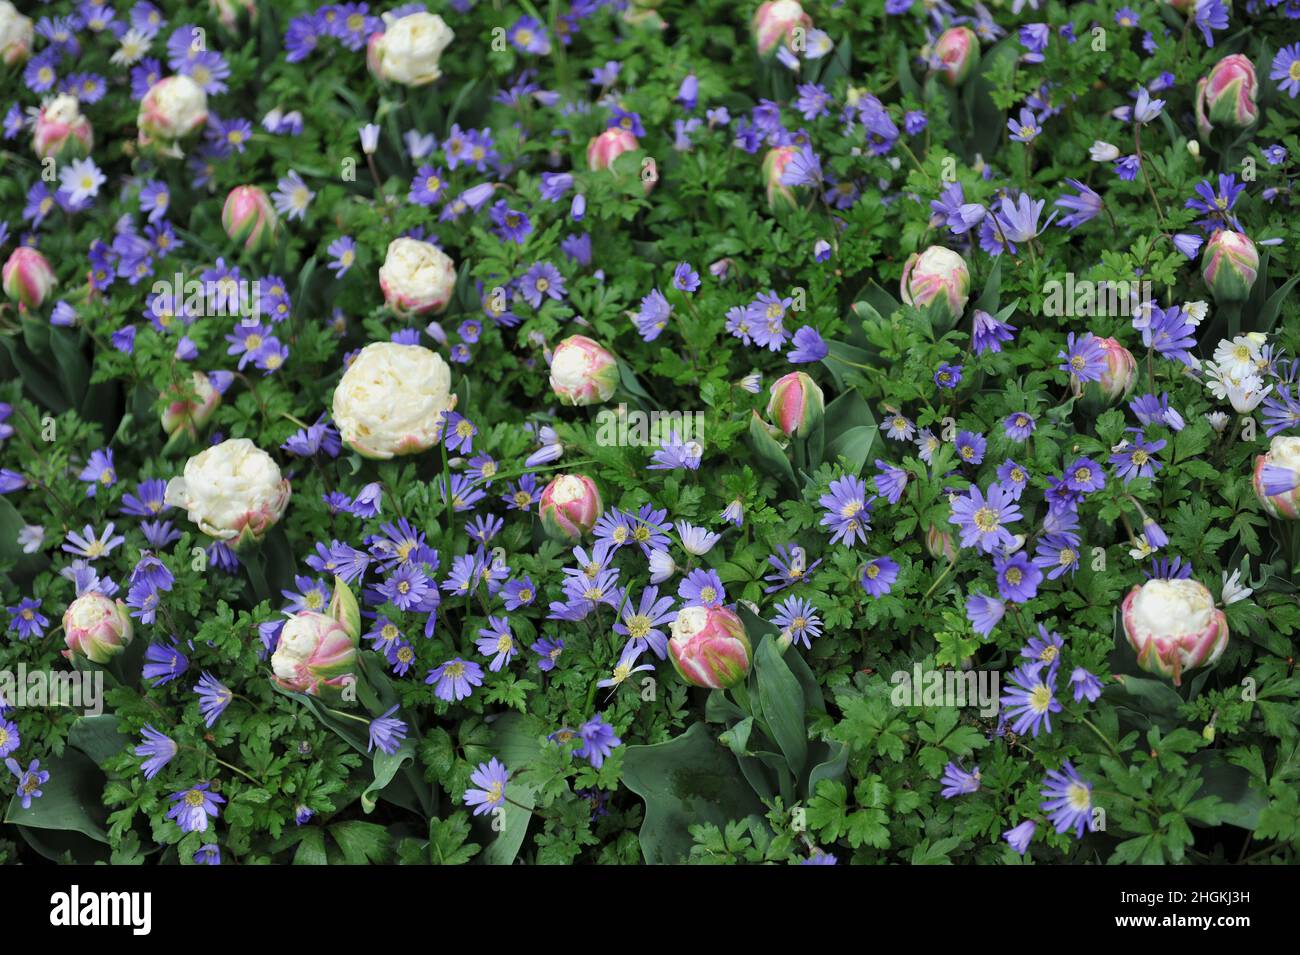 White with pink blush peony-flowered tulips (Tulipa) Ice Cream and winter windflower (Anemone blanda) bloom in a garden in April Stock Photo